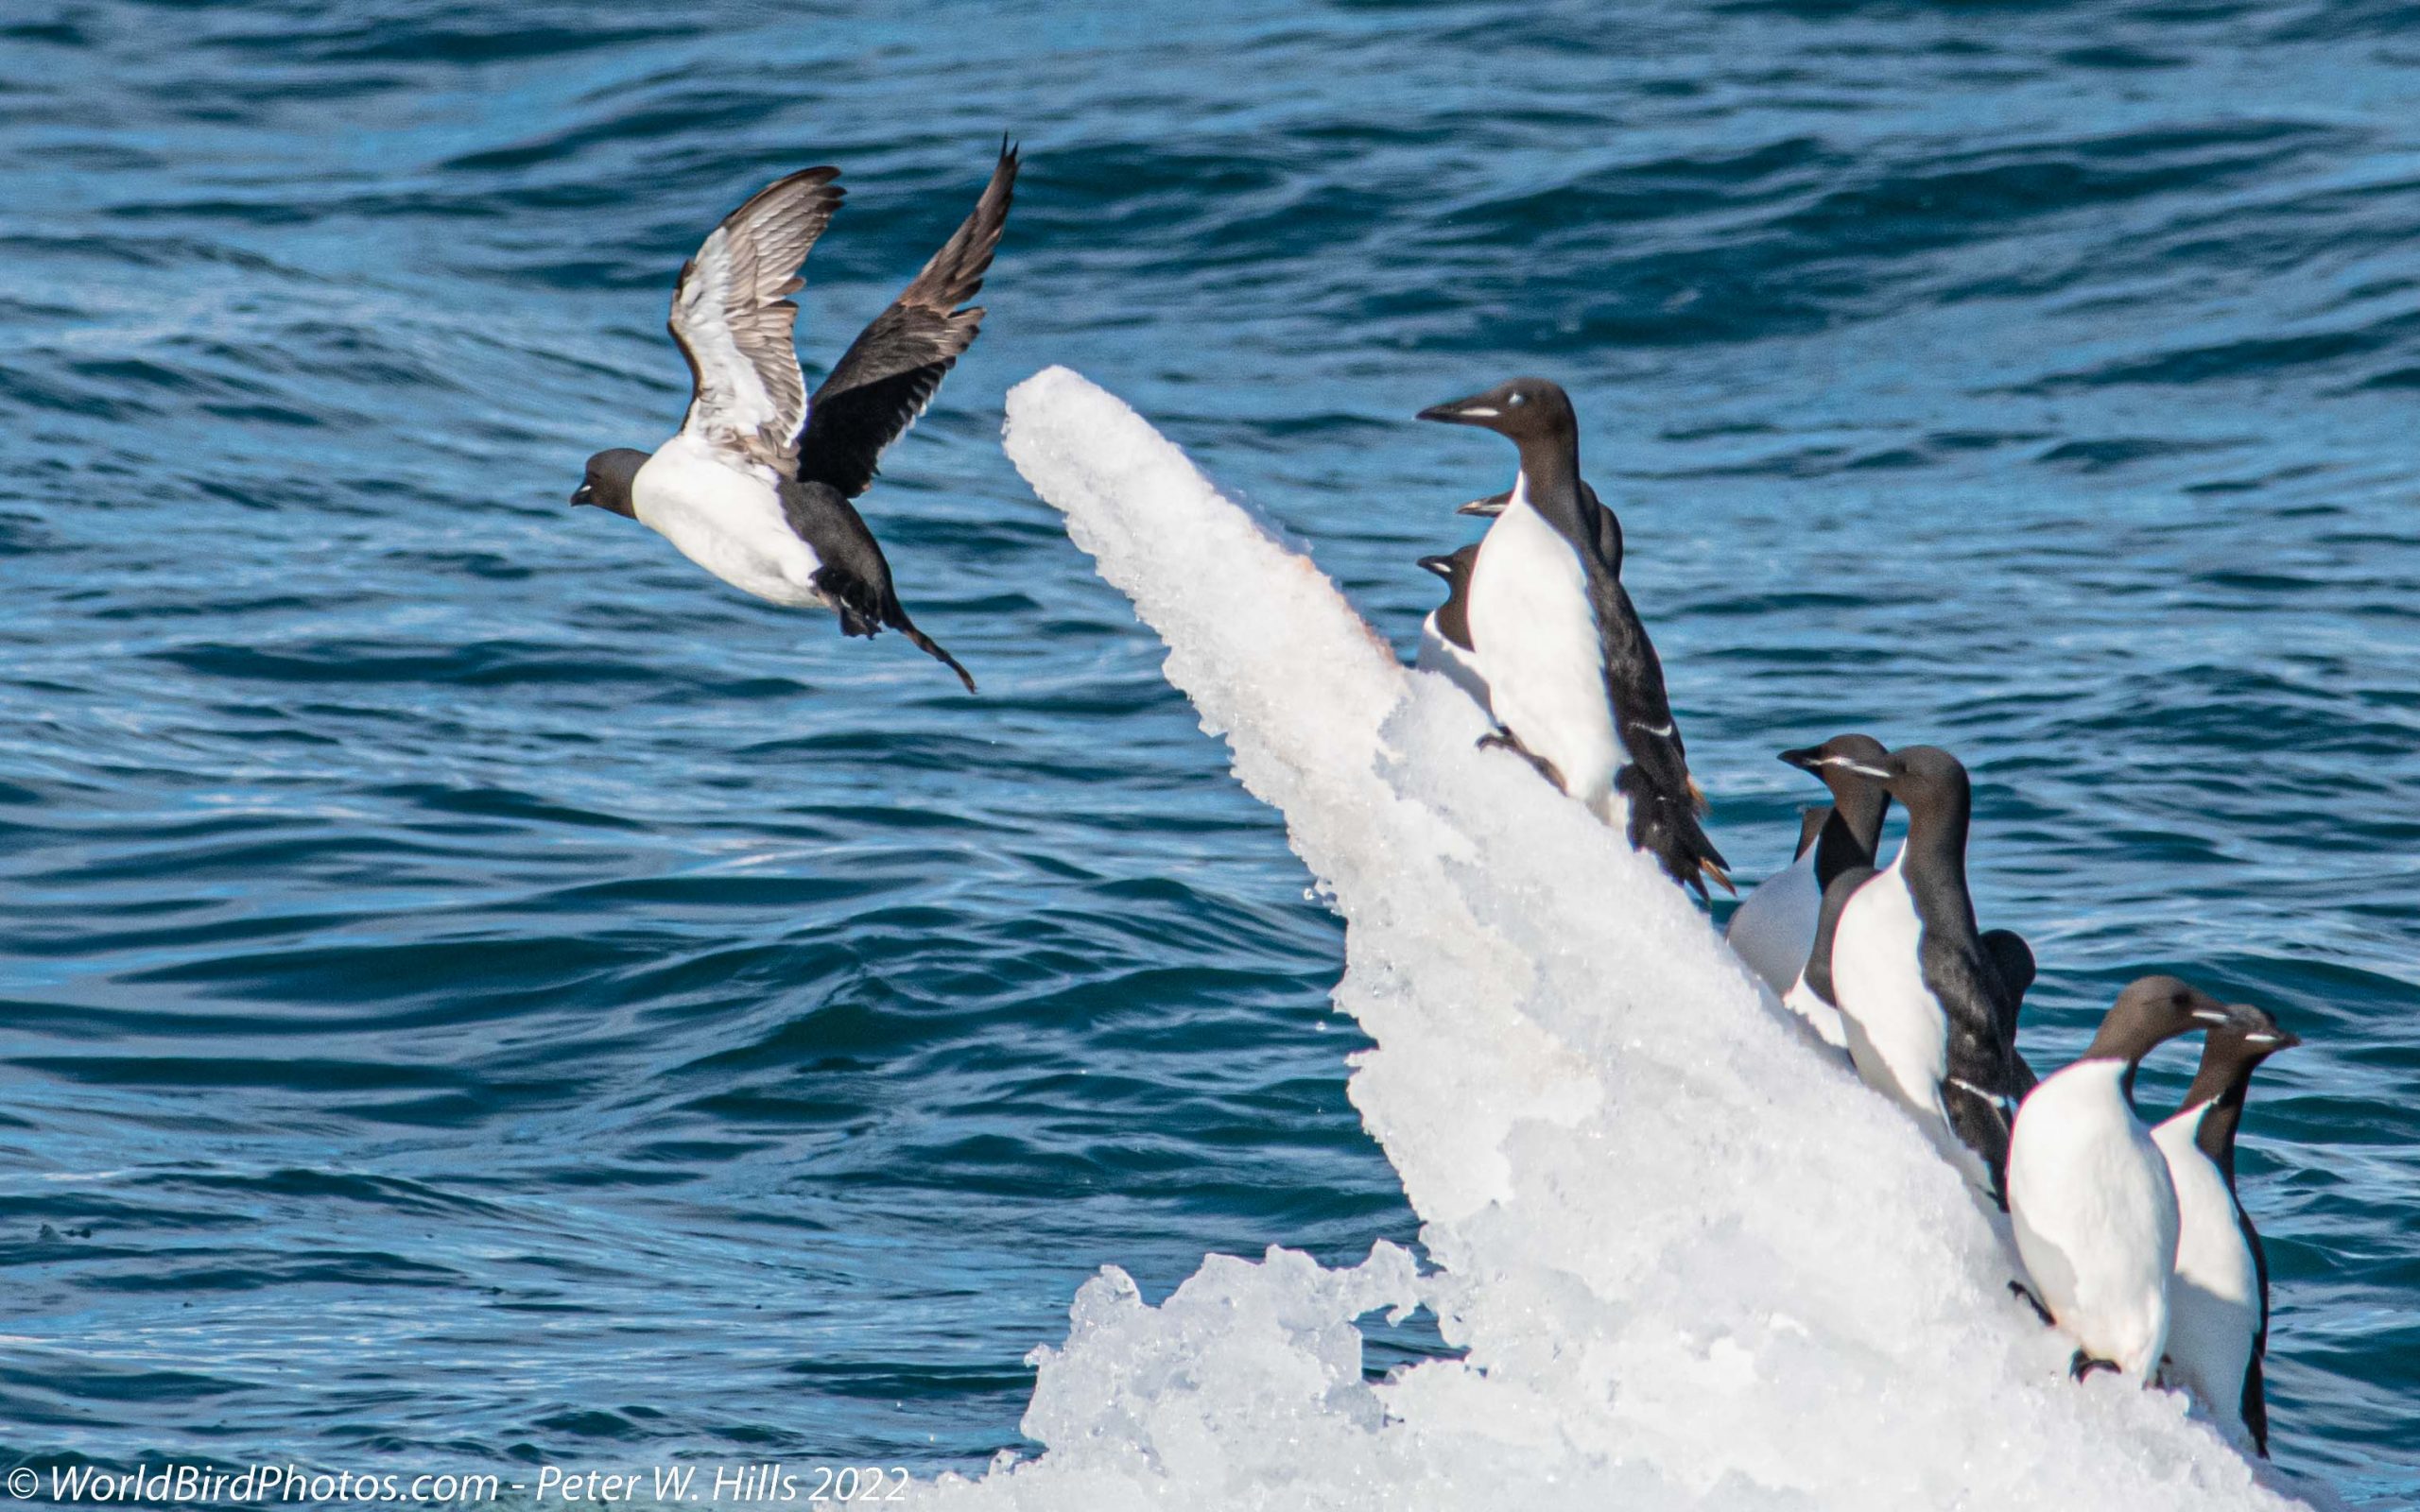 Murre Thick-billed (Uria lomvia) adults flying from Iceberg – Arctic, Norway